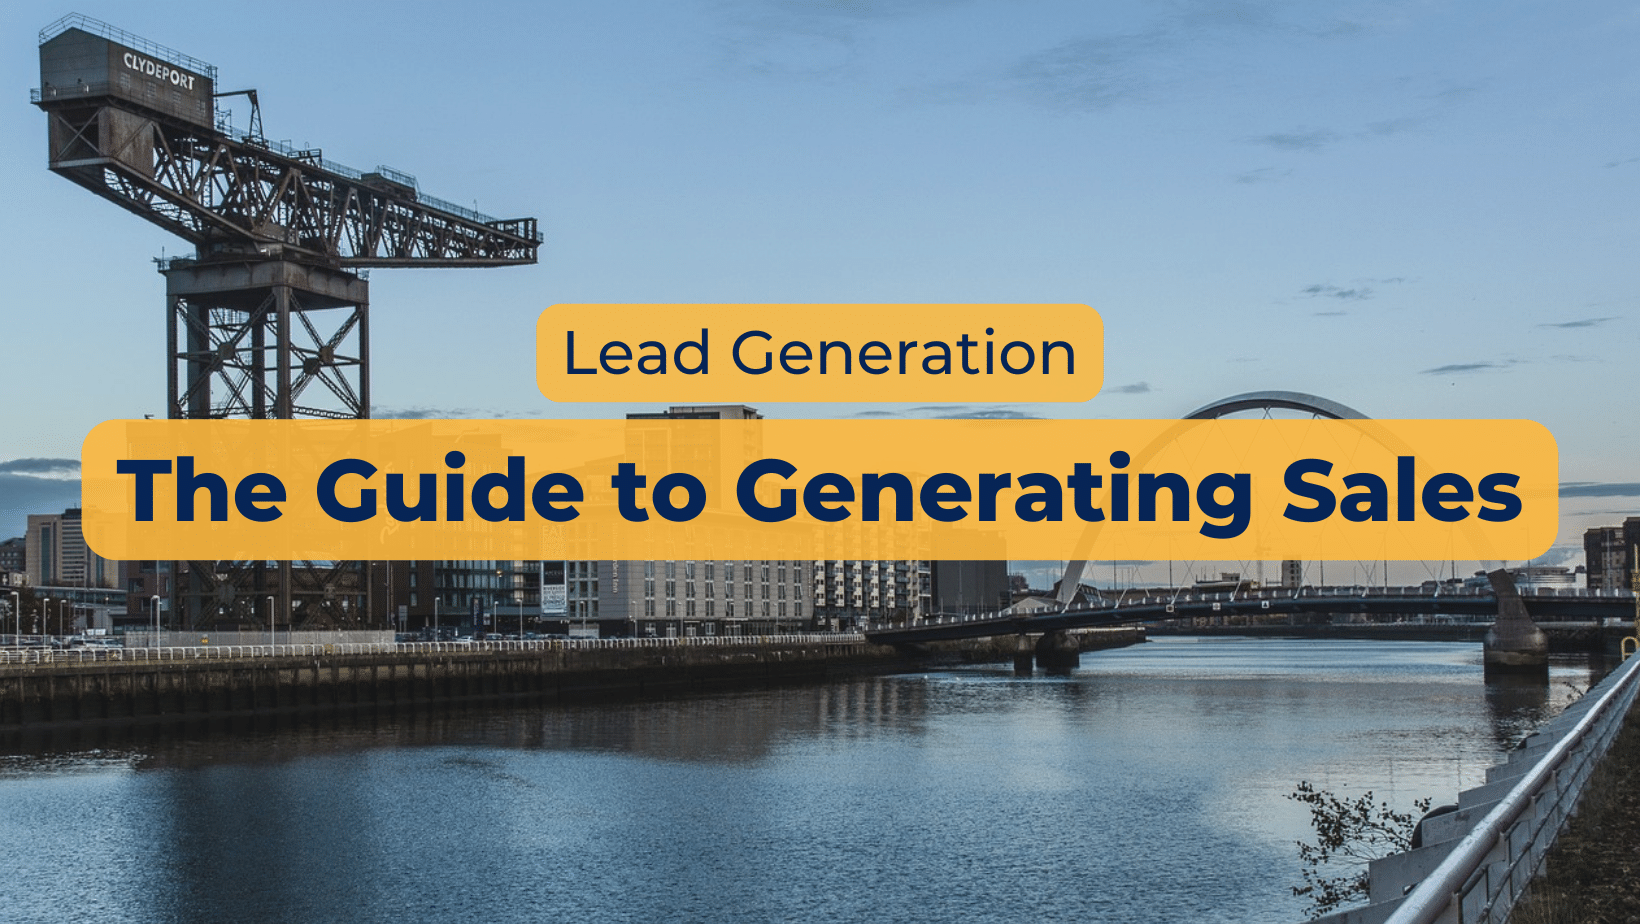 Lead Generation: The Guide to Generating Sales